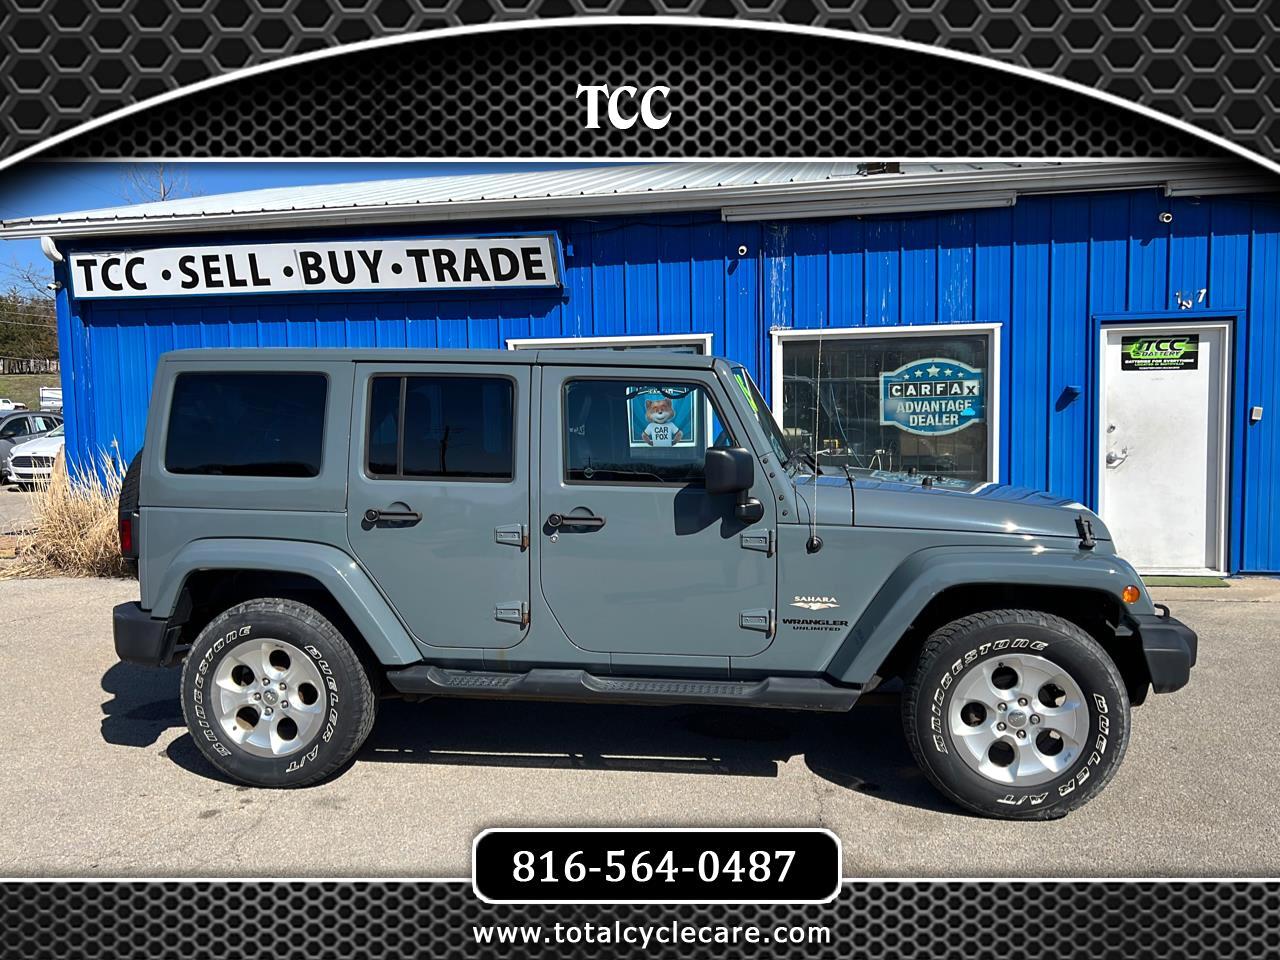 Used 2015 Jeep Wrangler Unlimited 4WD 4dr Sahara for Sale in Smithville,  Kansas City MO 64089 TCC